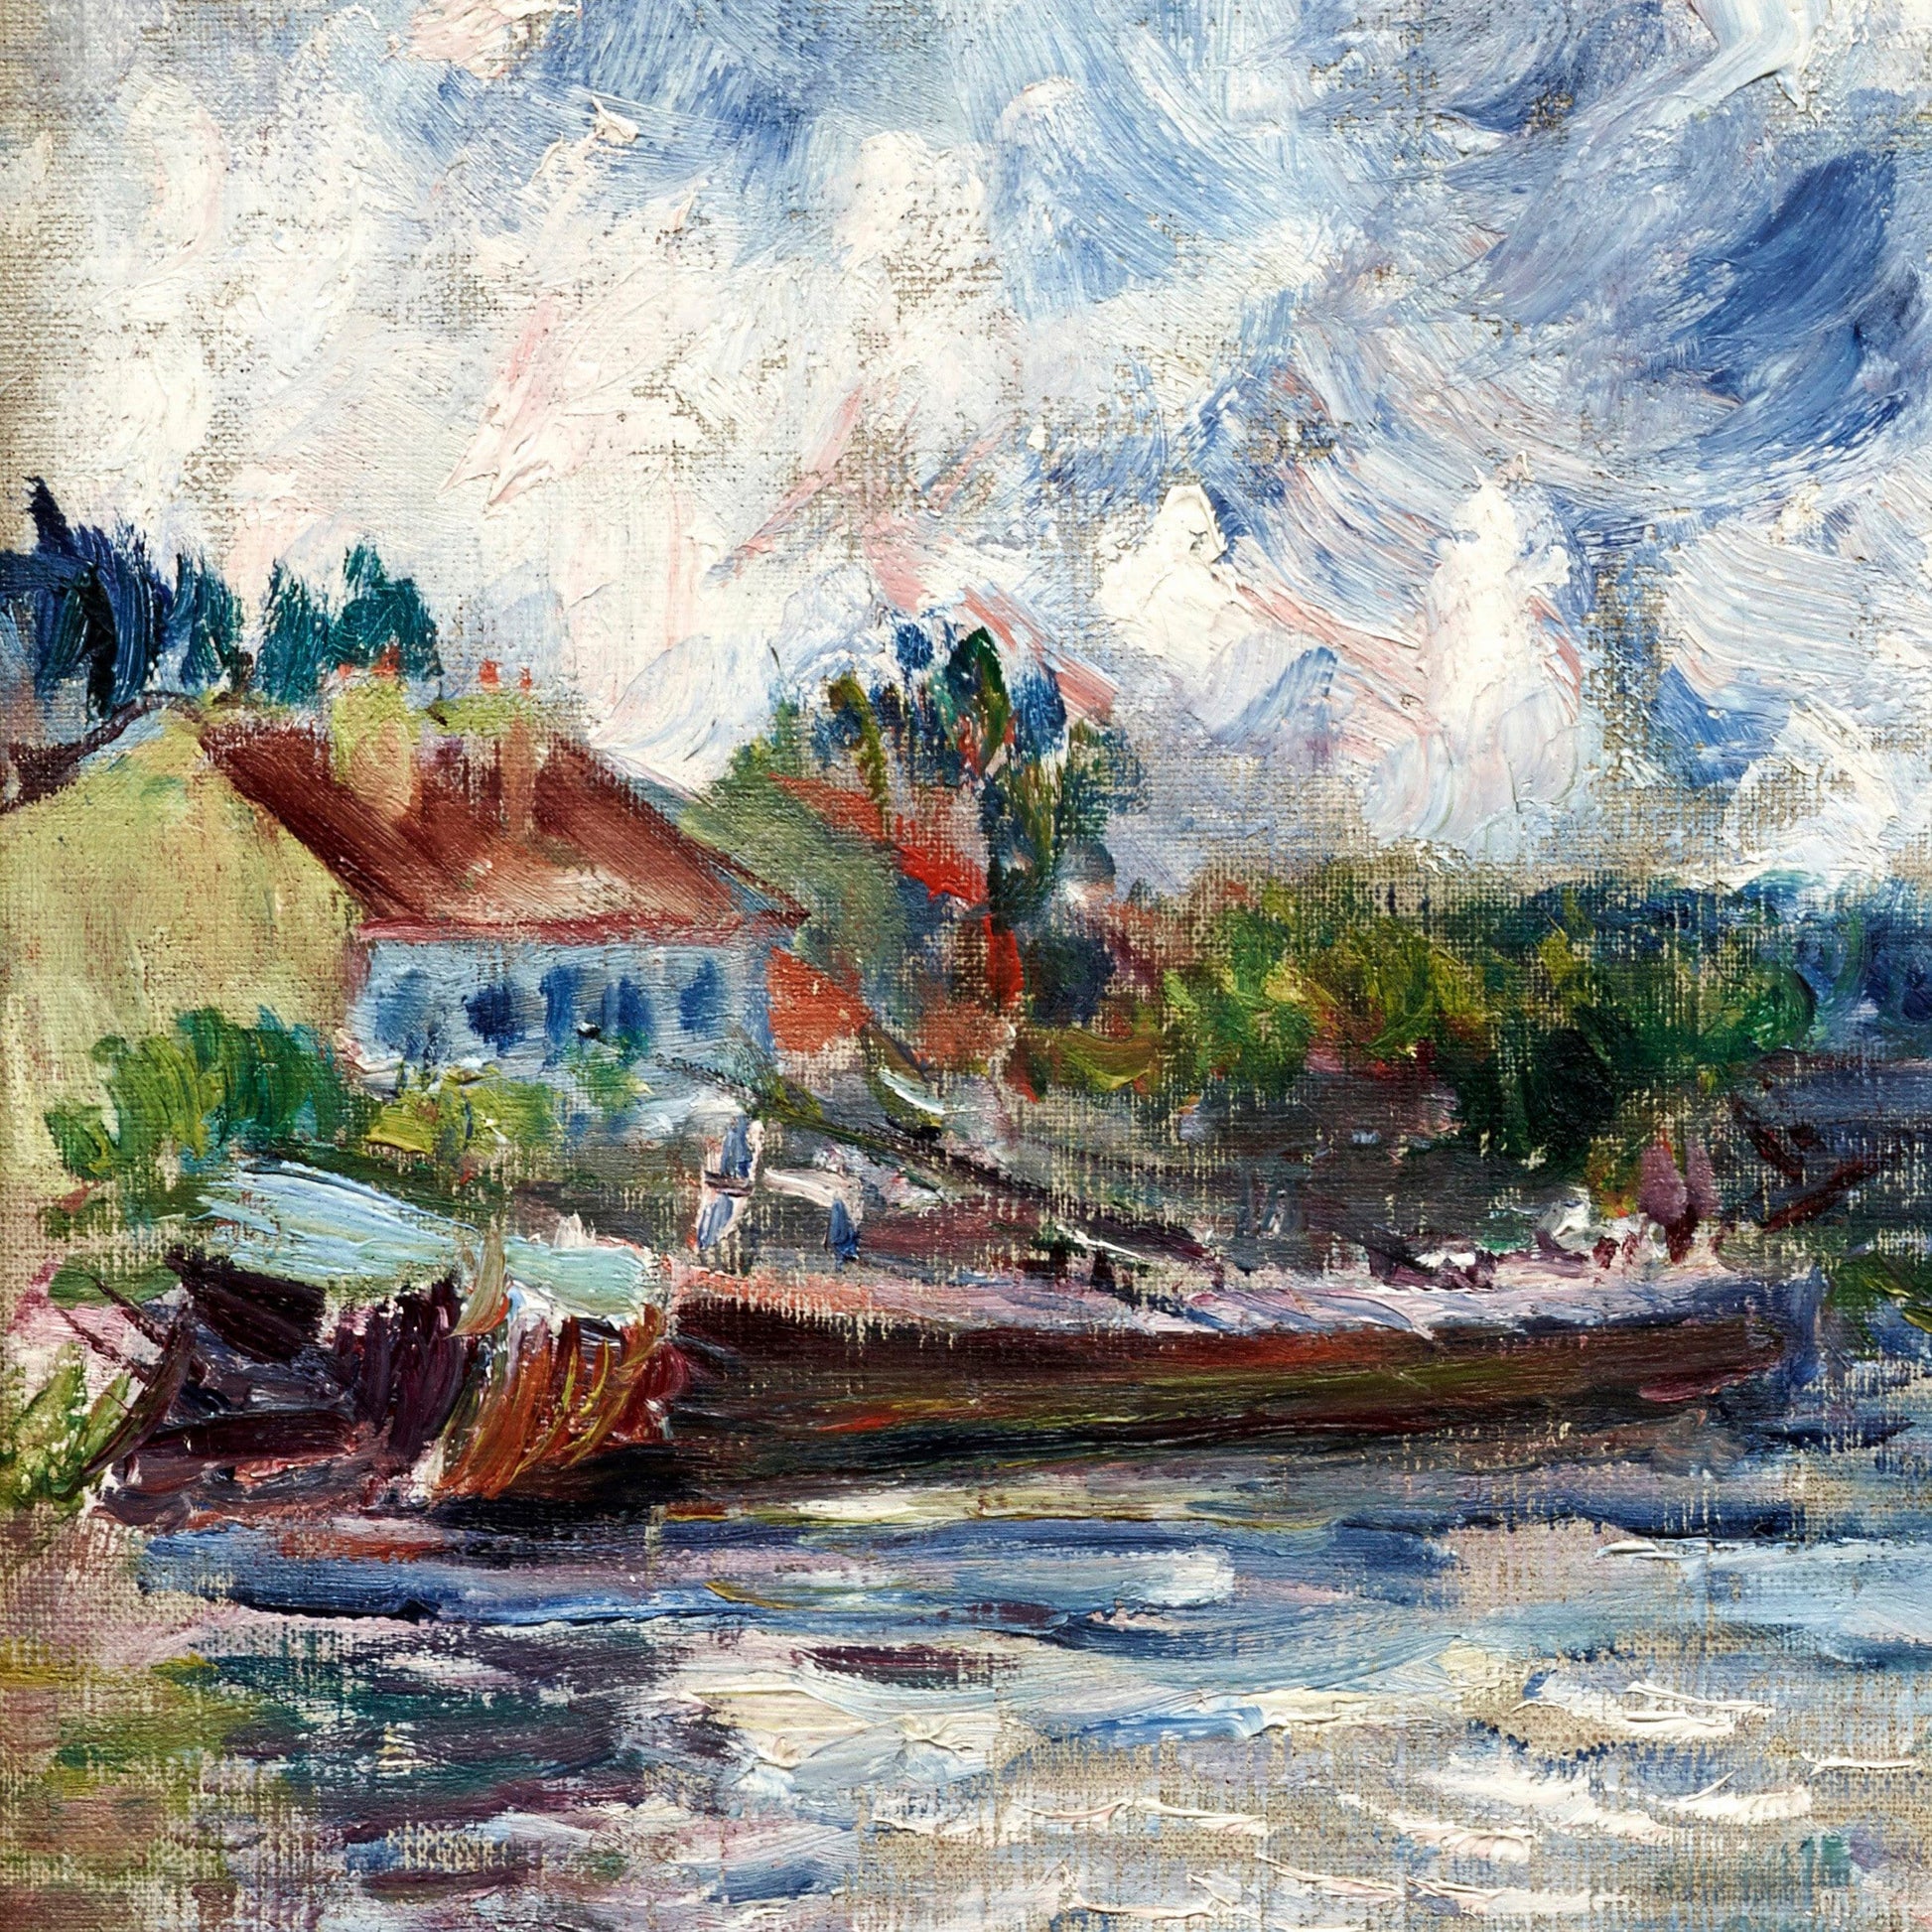 The Seine at Chatou by Pierre Auguste Renoir, 3d Printed with texture and brush strokes looks like original oil-painting, code:216